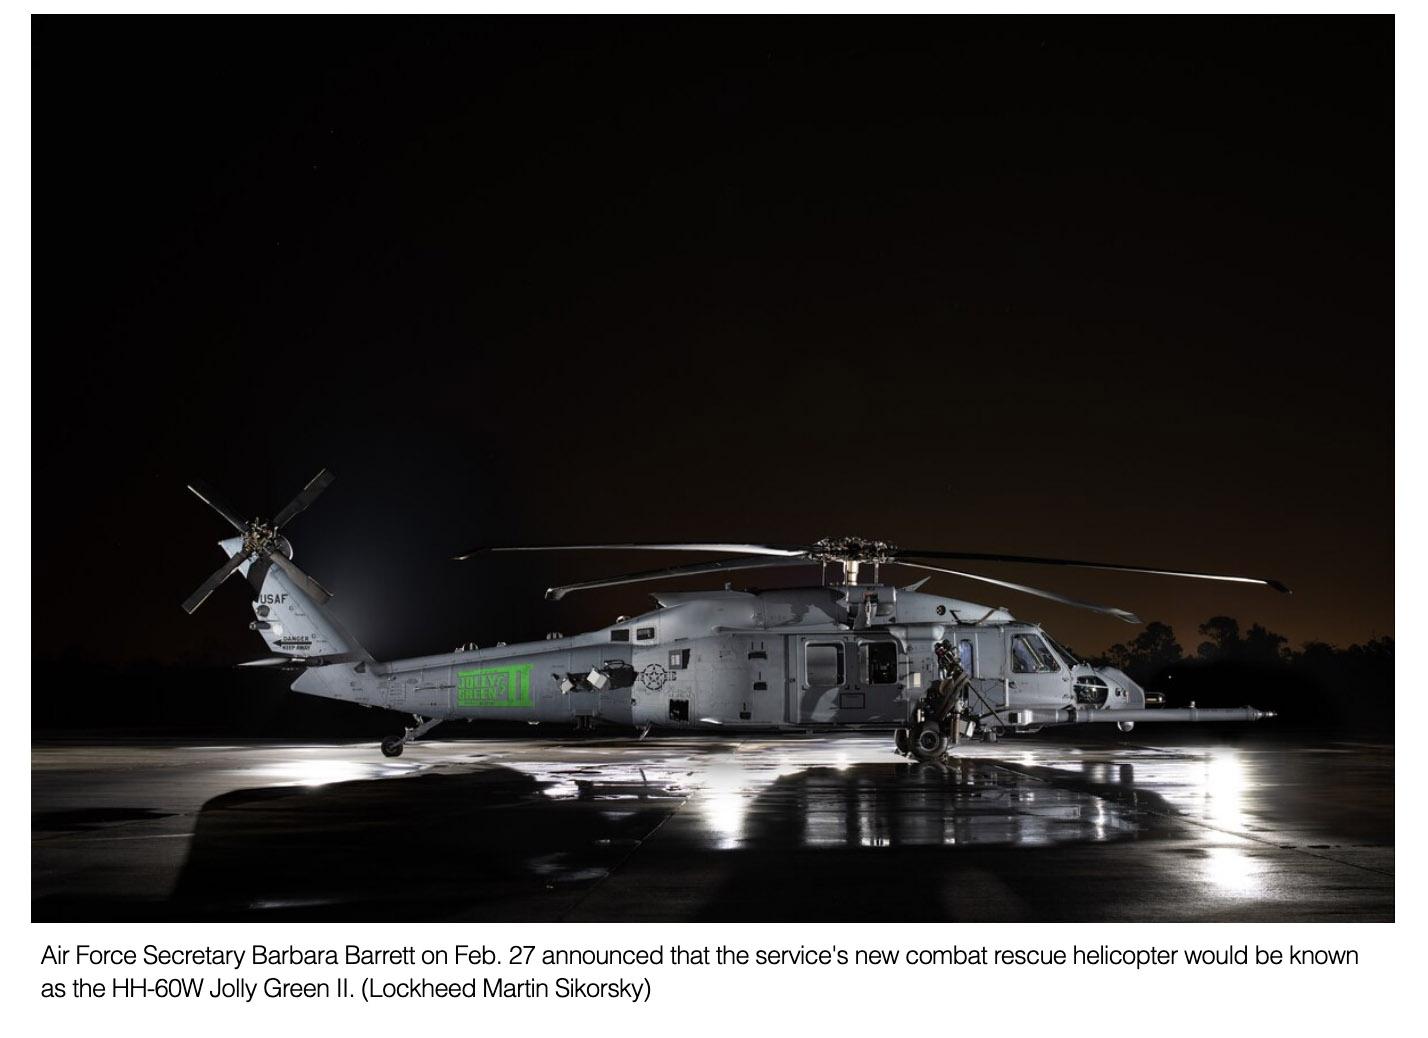  Ho, ho, ho, here's the name of the Air Force's combat rescue helicopter